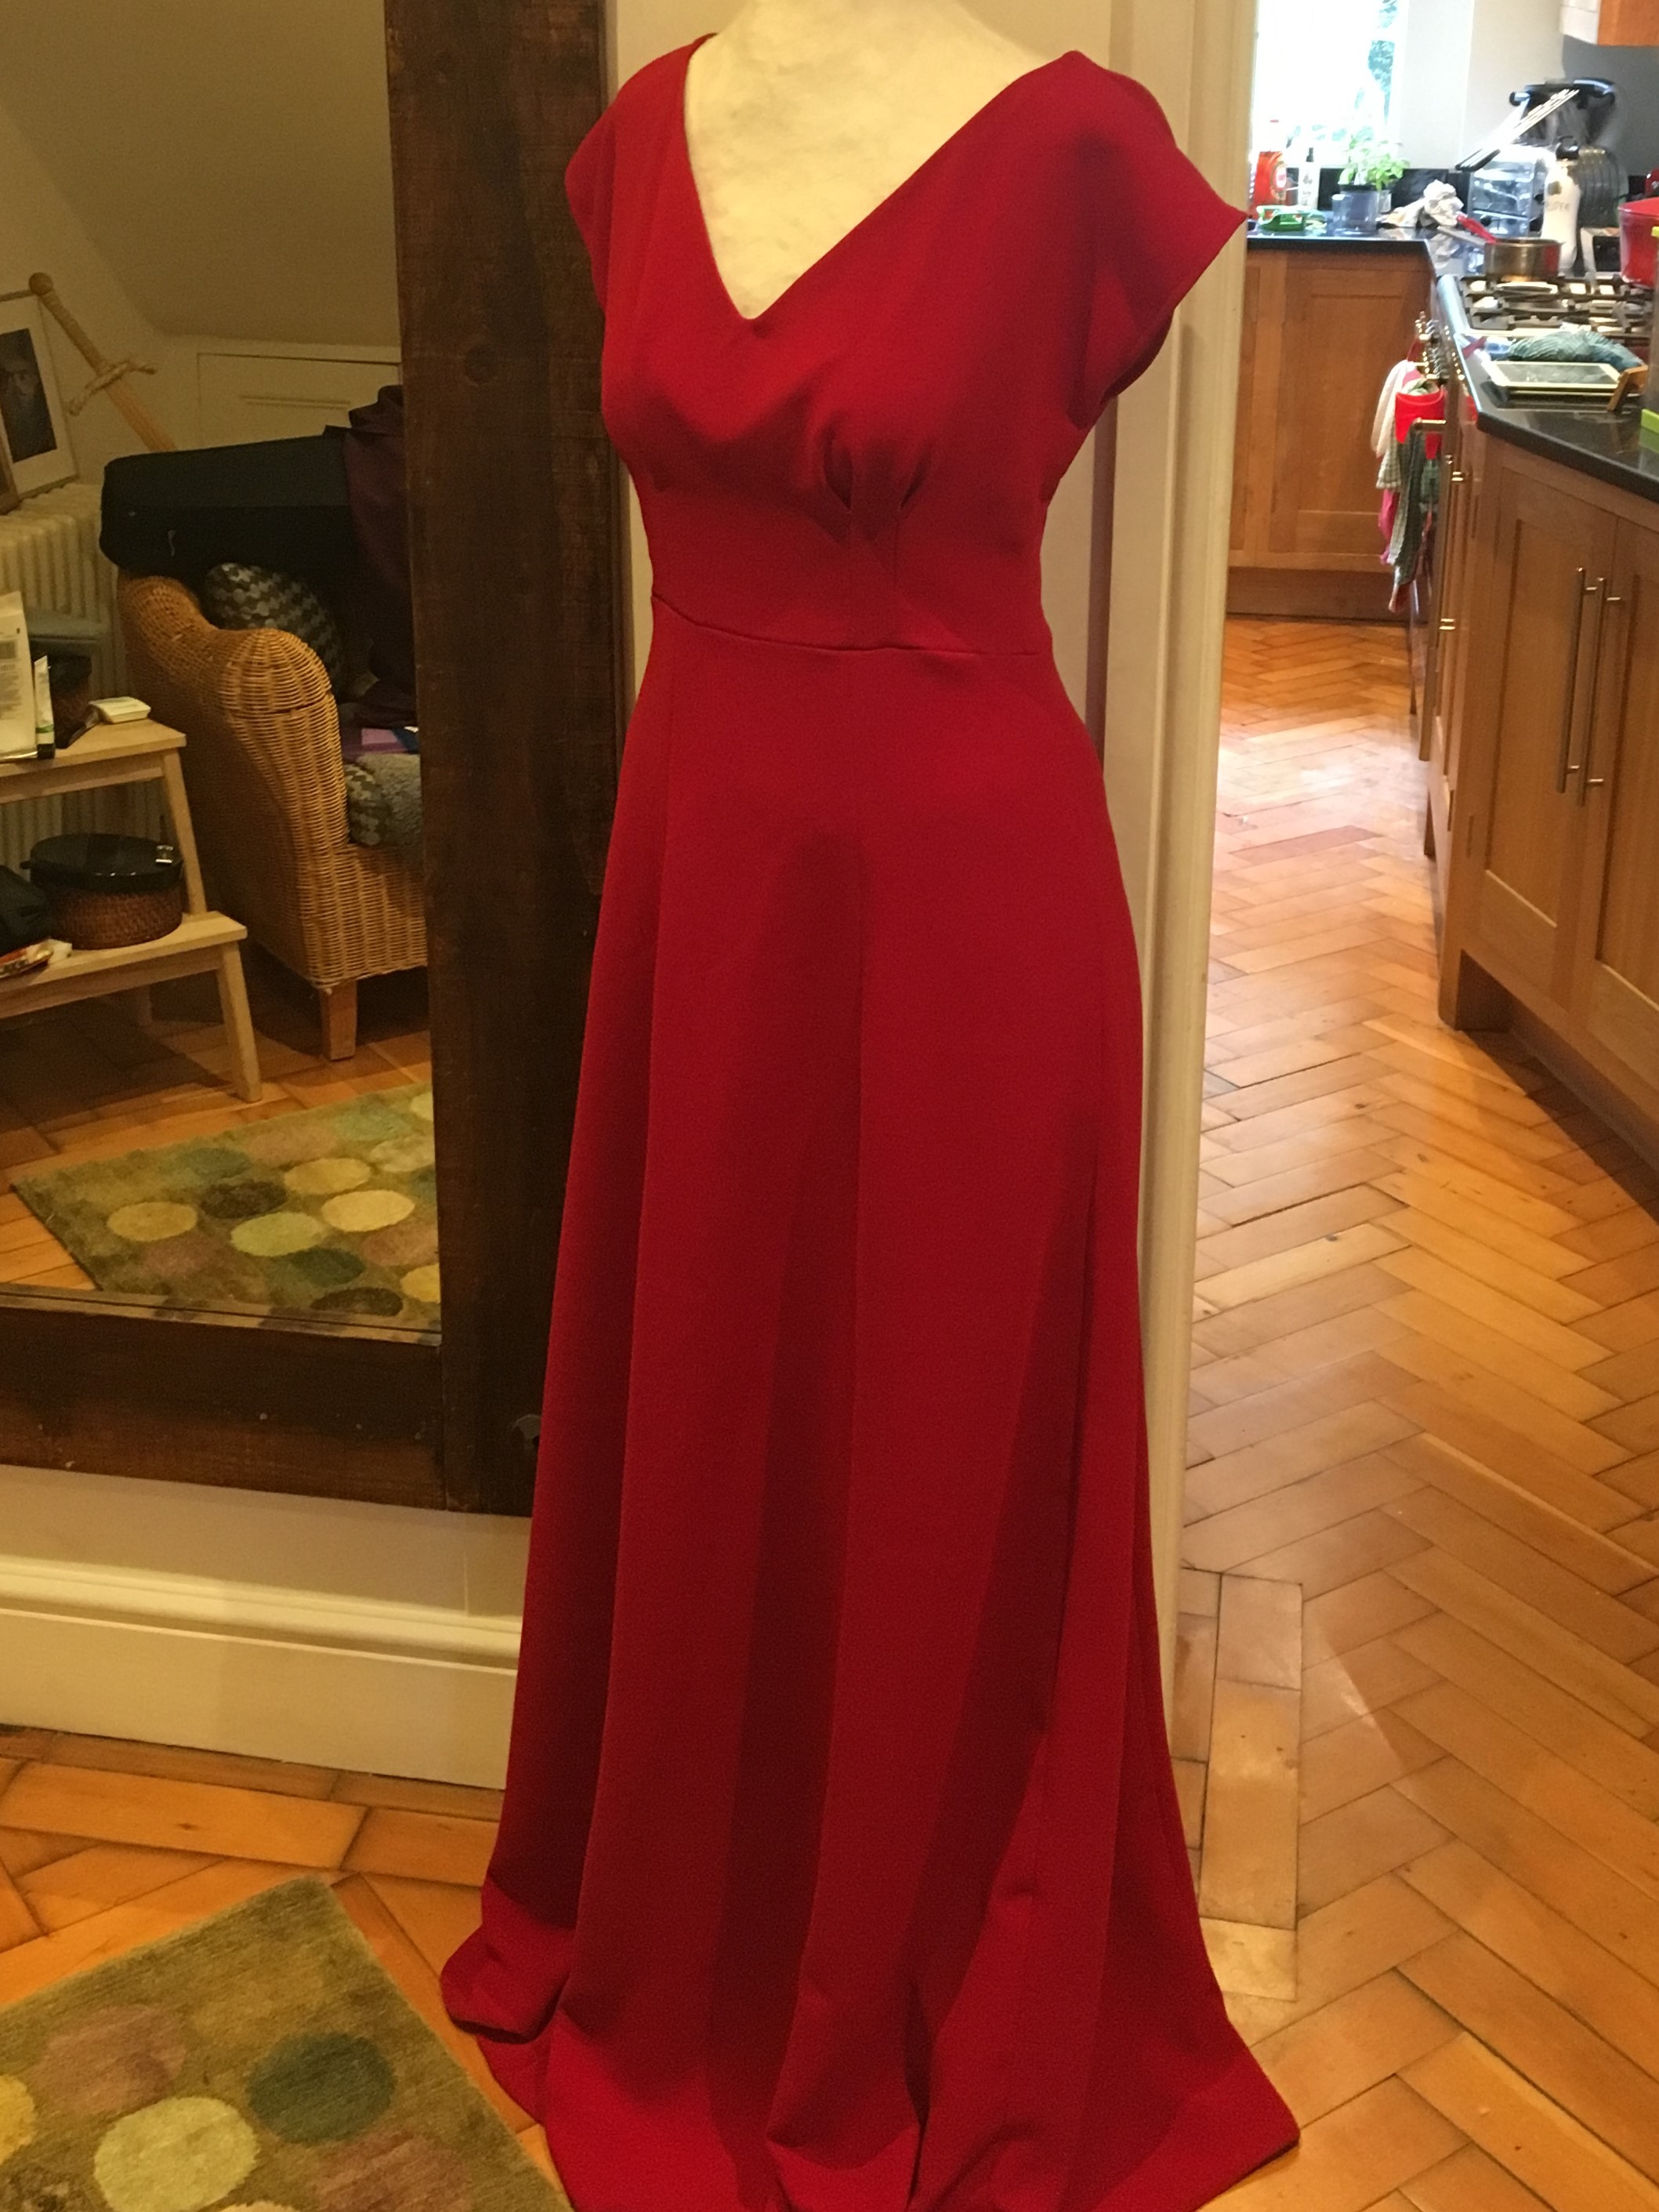 Red Anna Dress (By Hand pattern) – Sewing Projects | BurdaStyle.com